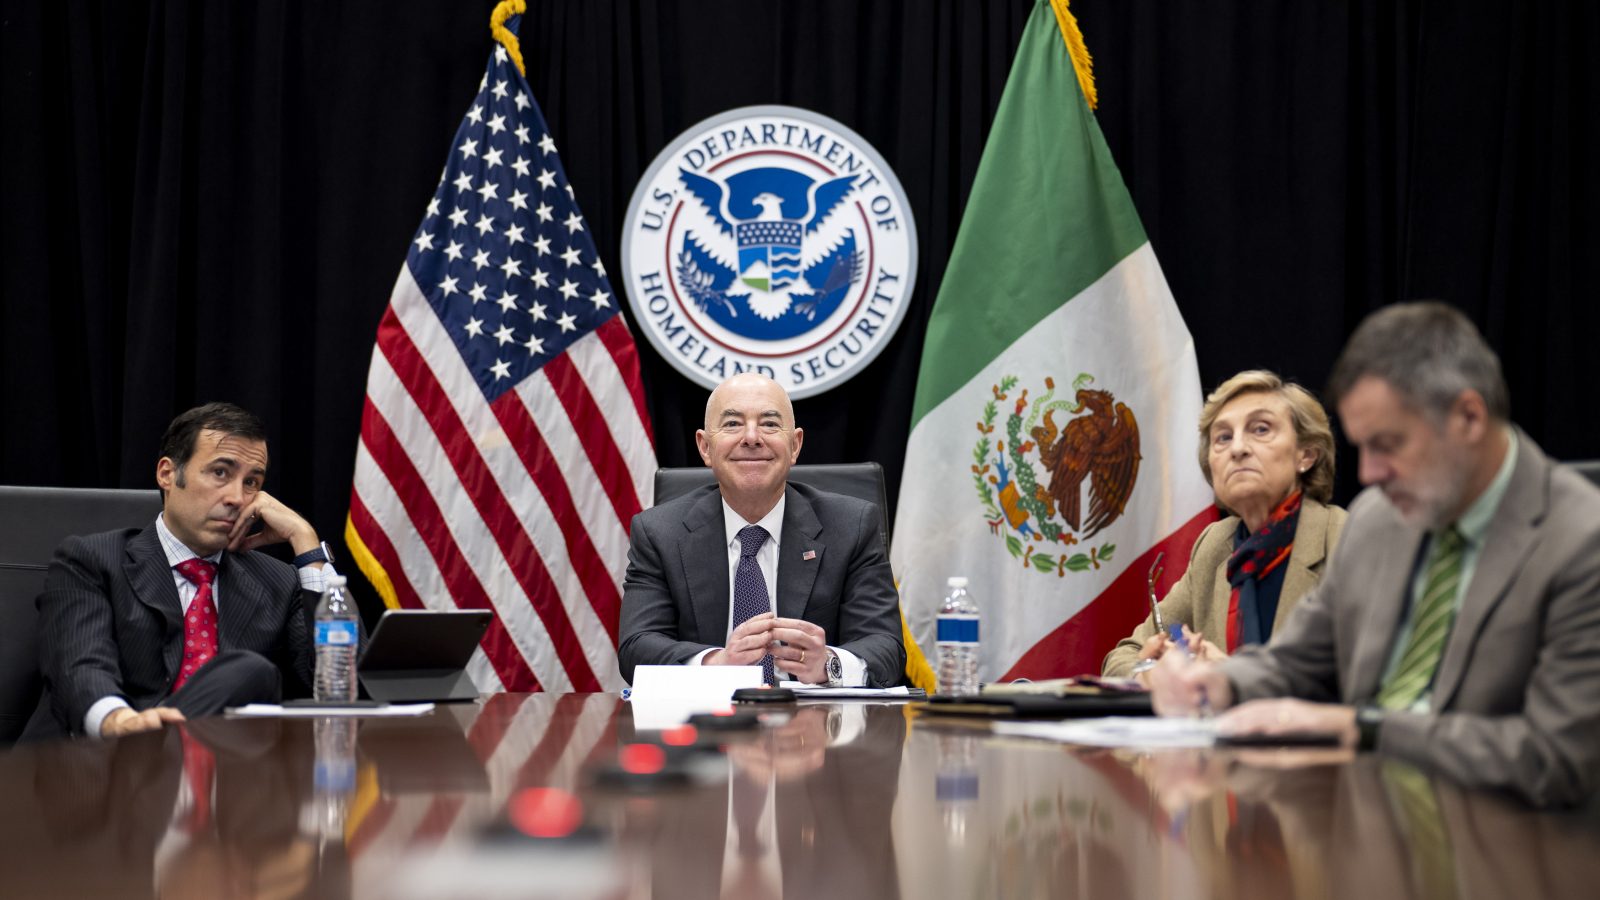 Homeland Secretary seated on a table with Mexico&#039;s Secretary of National Defense, General Luis Cresencio Sandoval, and the US Ambassador to Mexico, Ken Salazar. US and Mexico flags can be seen in the background.